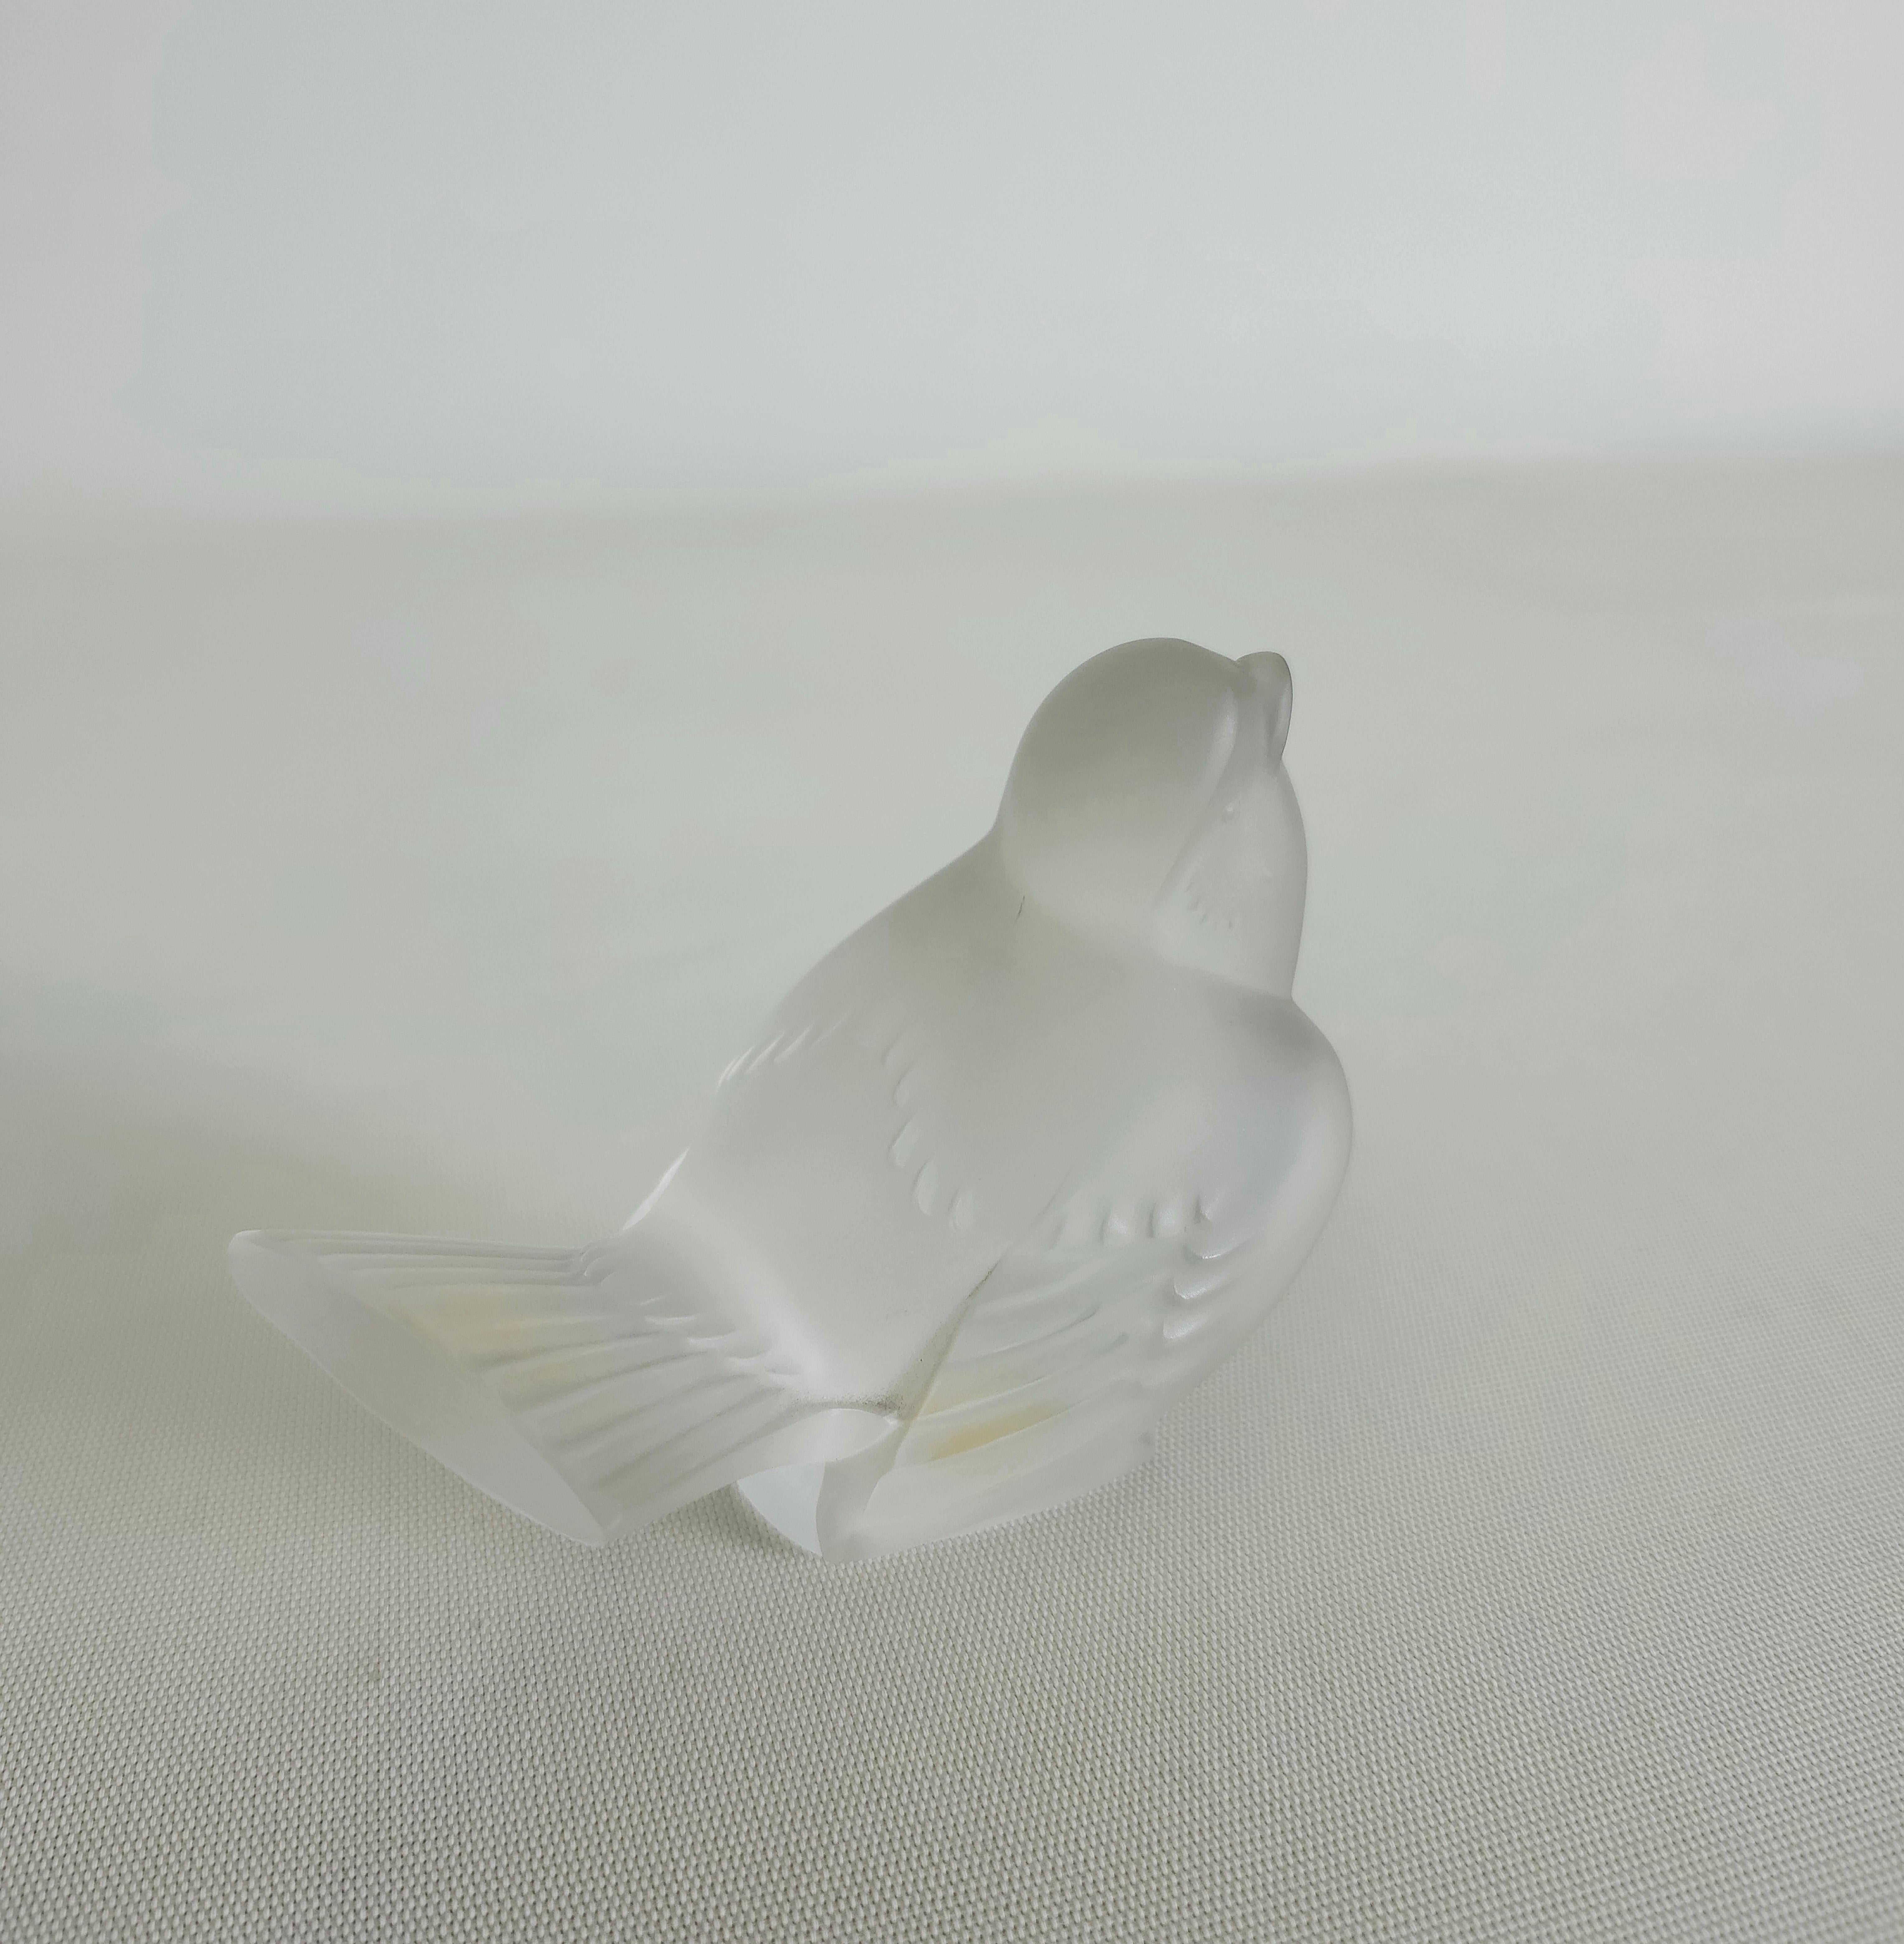 Decorative Object Animal Sculpture Crystal Glass Lalique Midcentury France 1960s For Sale 2